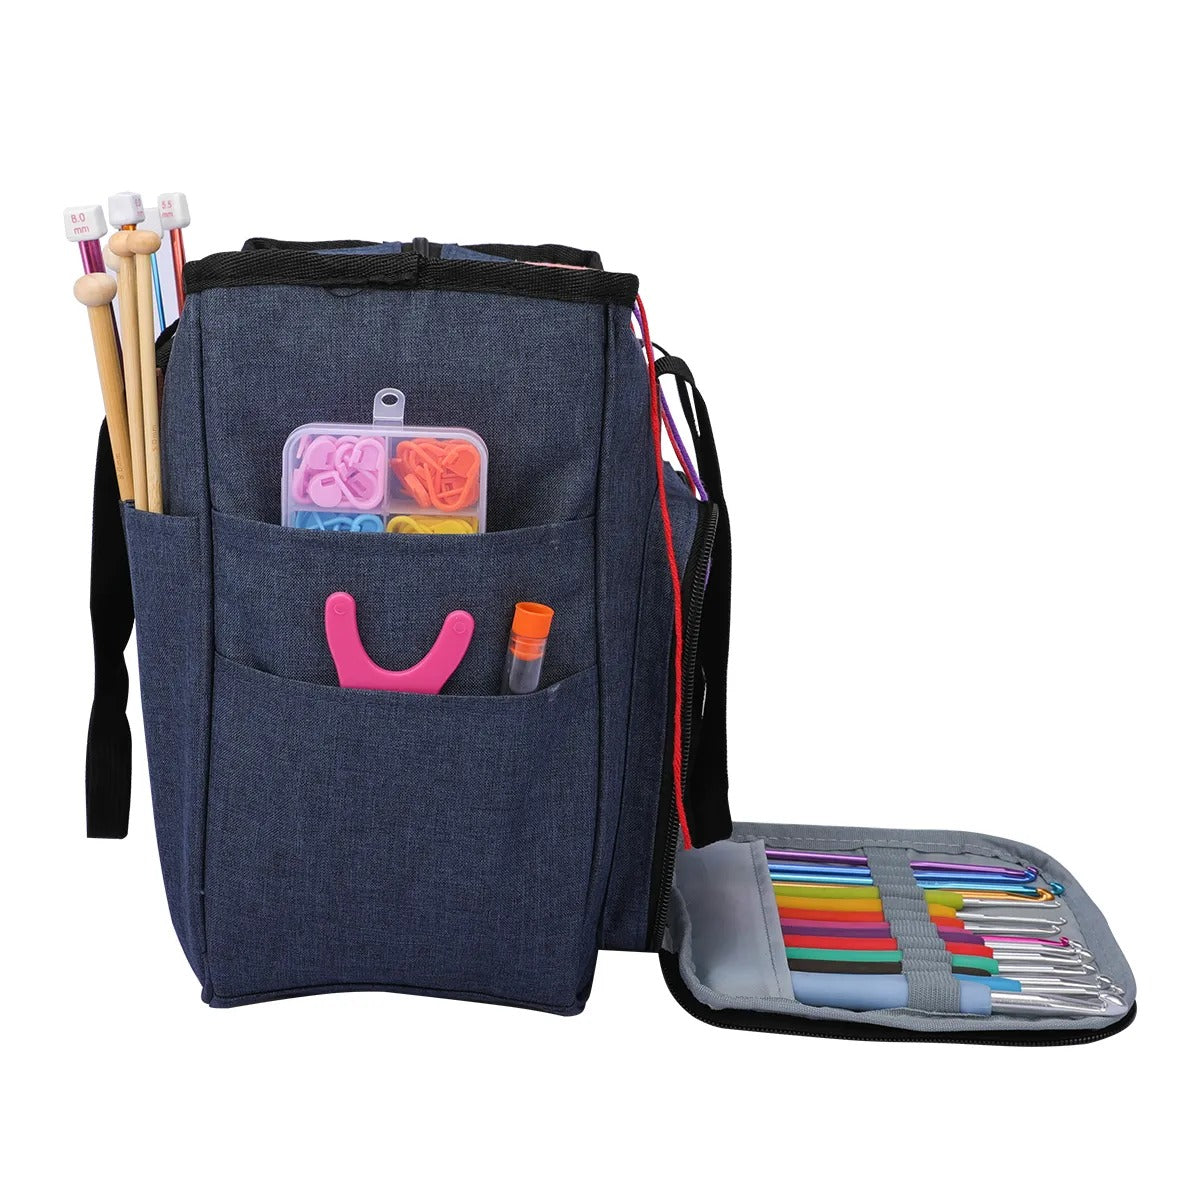 Yarn Organizer Tote with brushes, a pouch of colored pencils, and knitting essentials.